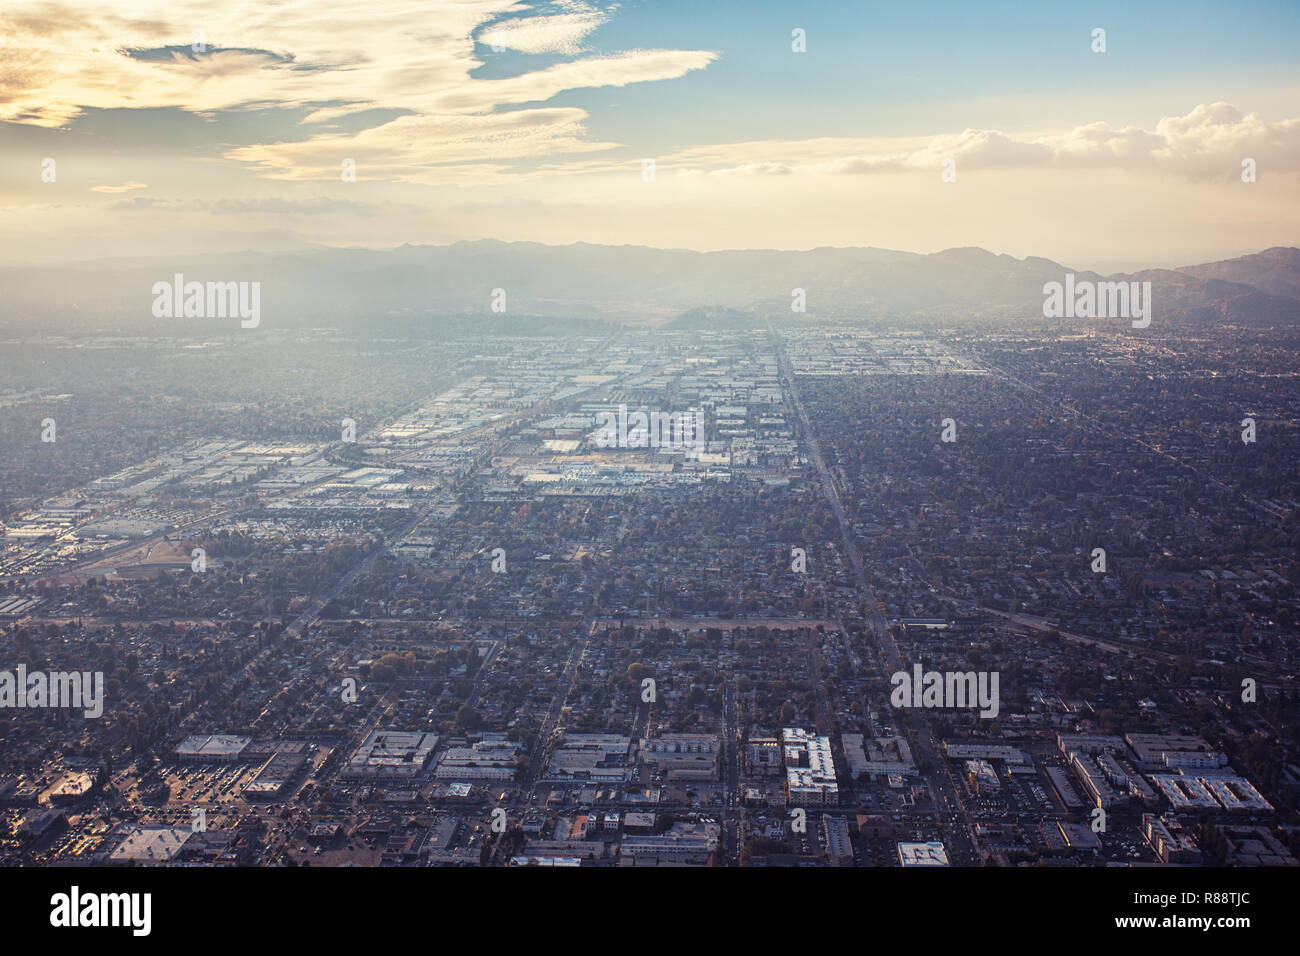 Aerial view of a beautiful mountain range at Southern California on a spectacular day. Stock Photo